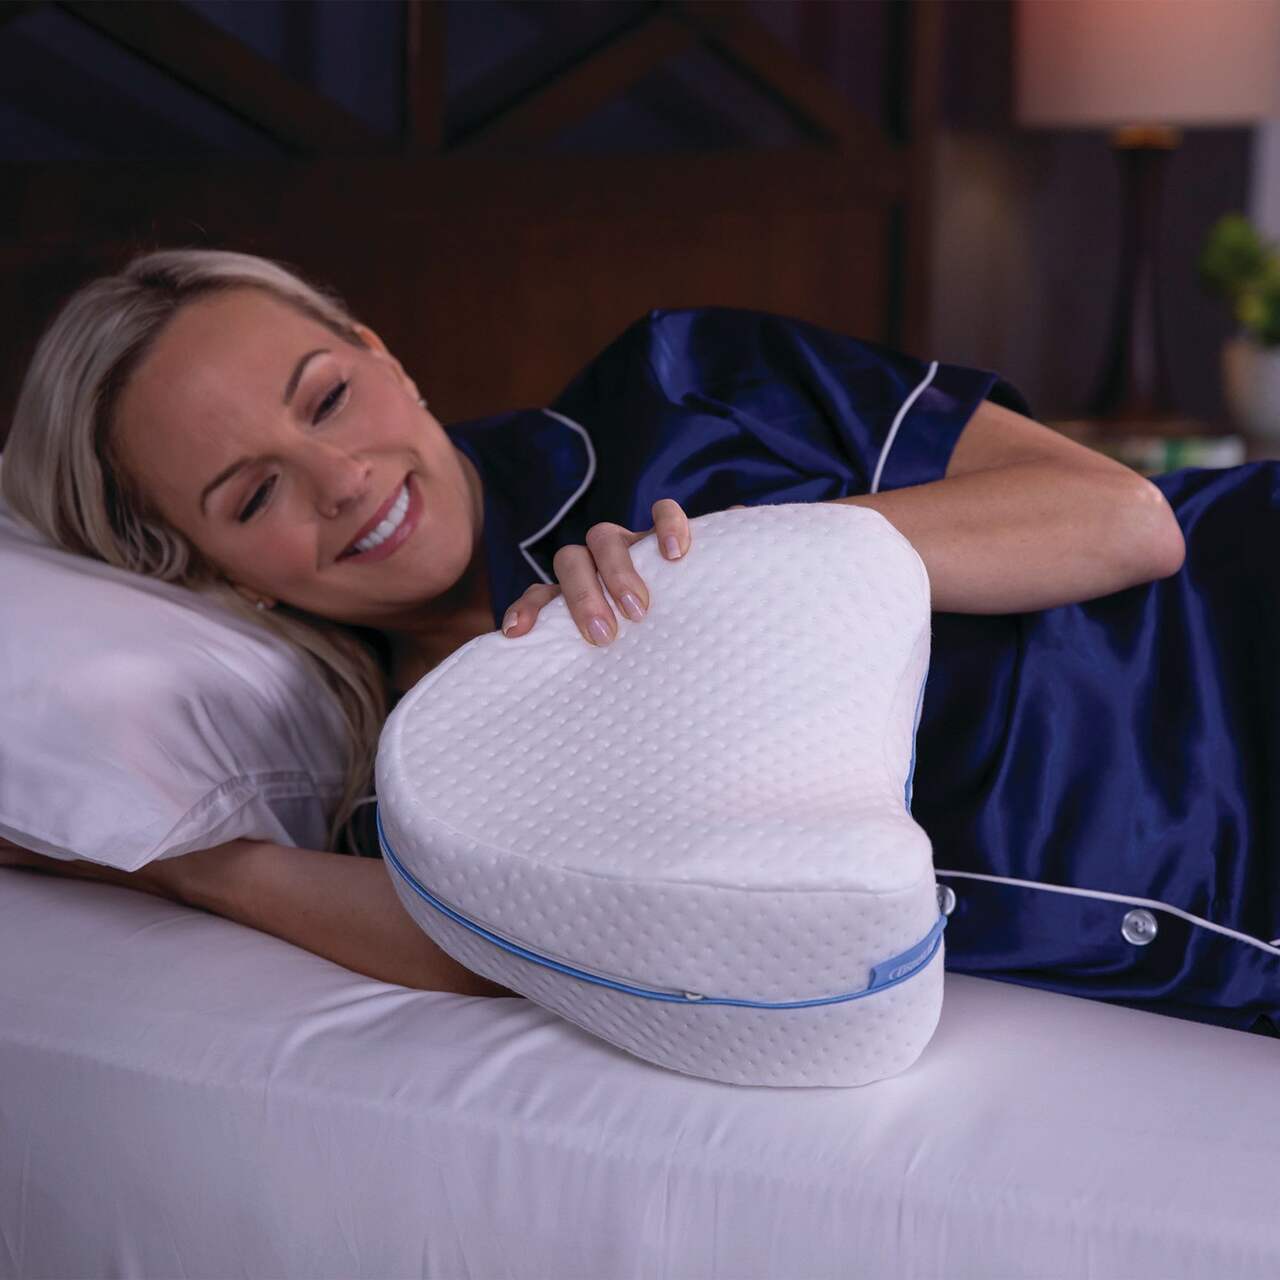 https://media-www.canadiantire.ca/product/living/as-seen-on-tv/asotv/3995979/contour-legacy-pillow-992ad0dc-a68b-4a47-83b3-c17578dcd684-jpgrendition.jpg?imdensity=1&imwidth=1244&impolicy=mZoom